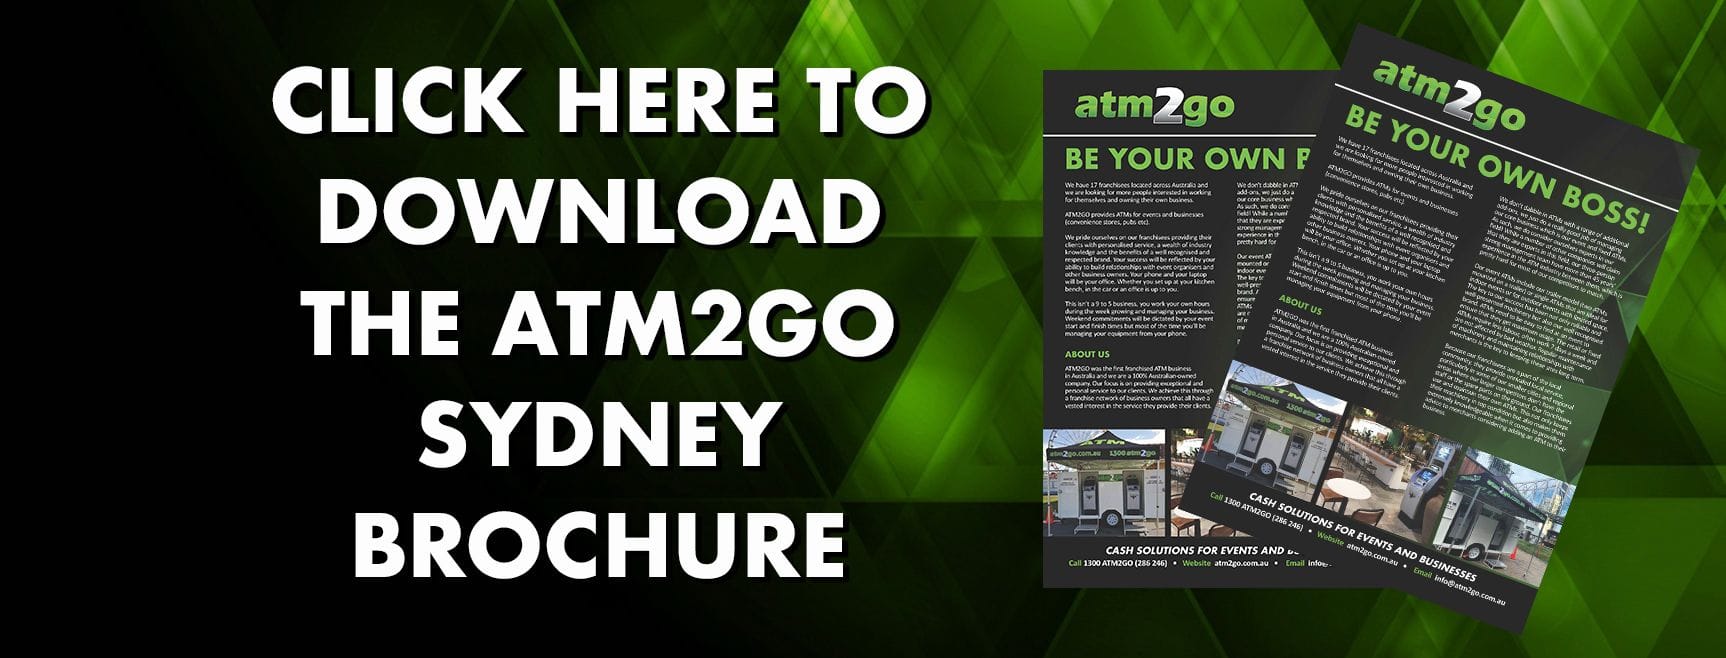 click here to download the franchise brochure